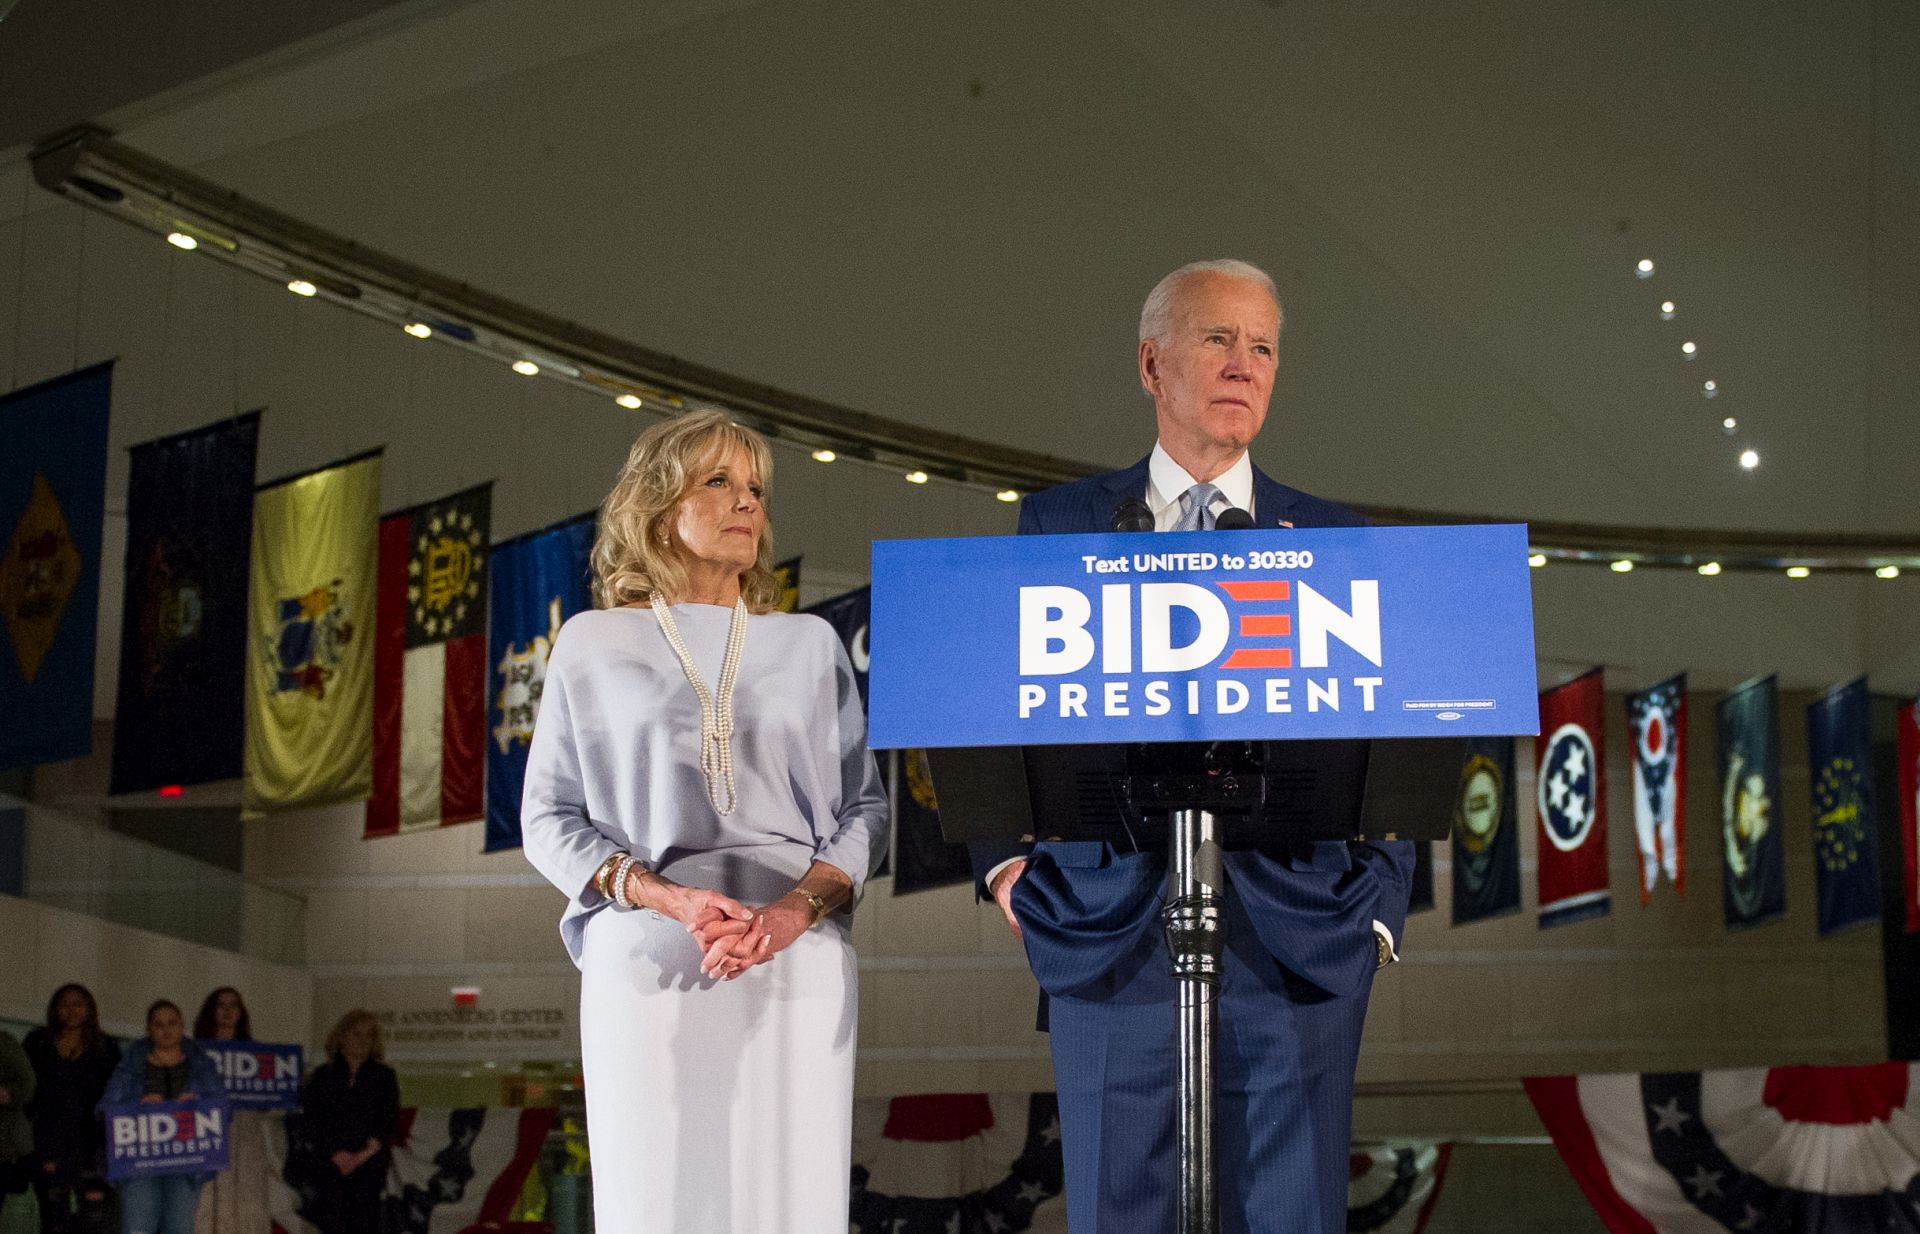 epaselect epa08284890 Democratic Party presidential candidate Joe Biden (R), accompanied by his wife Jill Biden (L), speaks at a primary night event at the National Constitution Center in Philadelphia, Pennsylvania, USA, 10 March 2020. Results from primary elections in five states come in on the evening of 10 March, as Biden and Sanders compete for the Democratic party nomination.  EPA/TRACIE VAN AUKEN